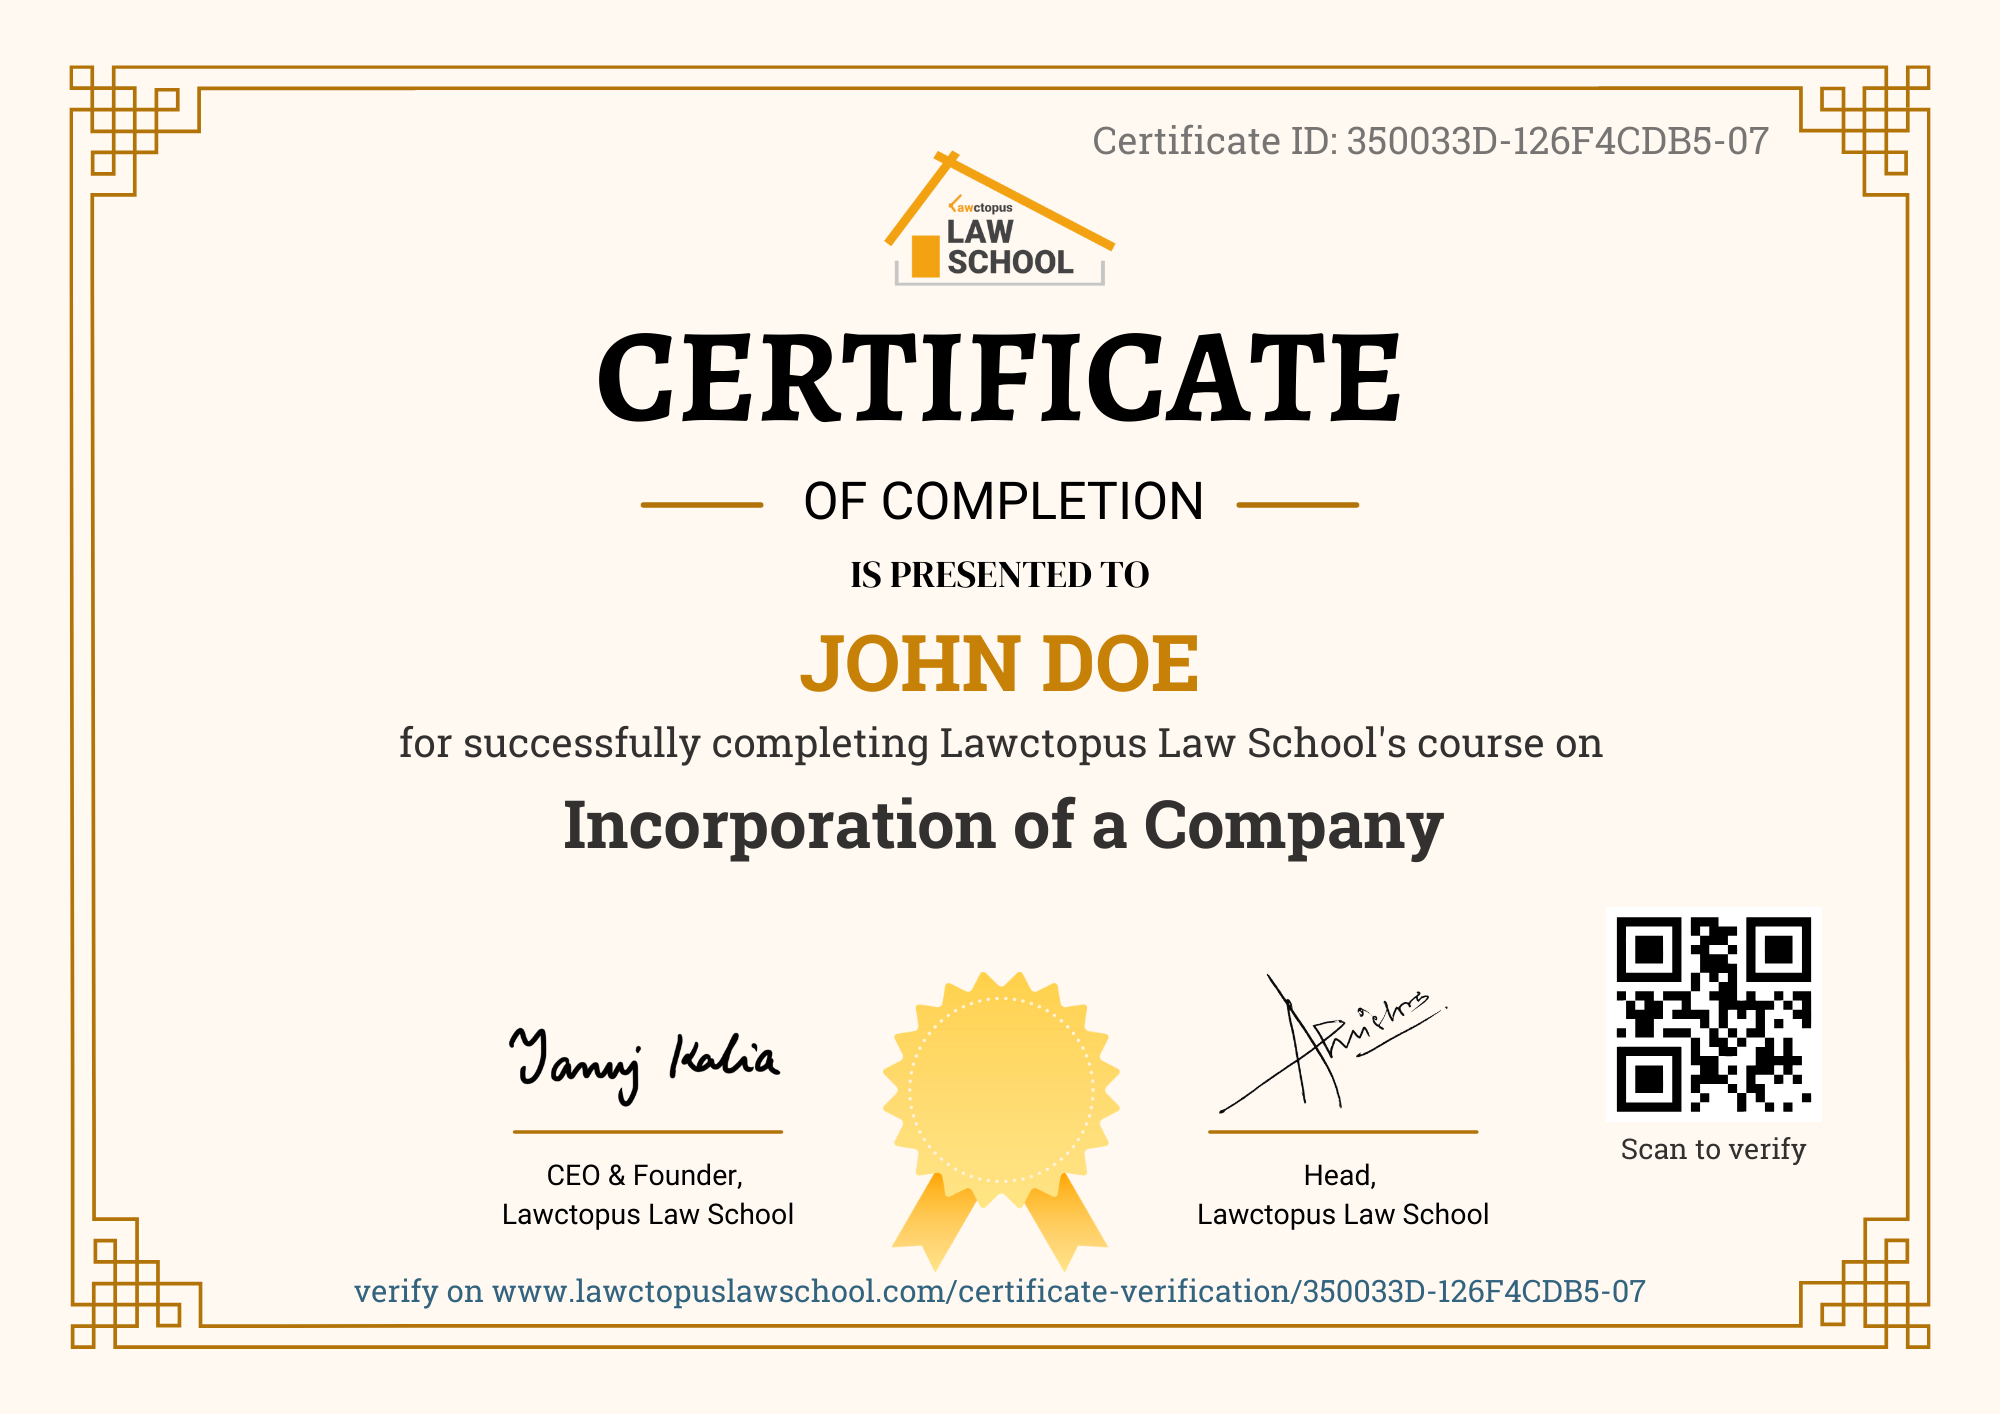 Incorporation of a Company